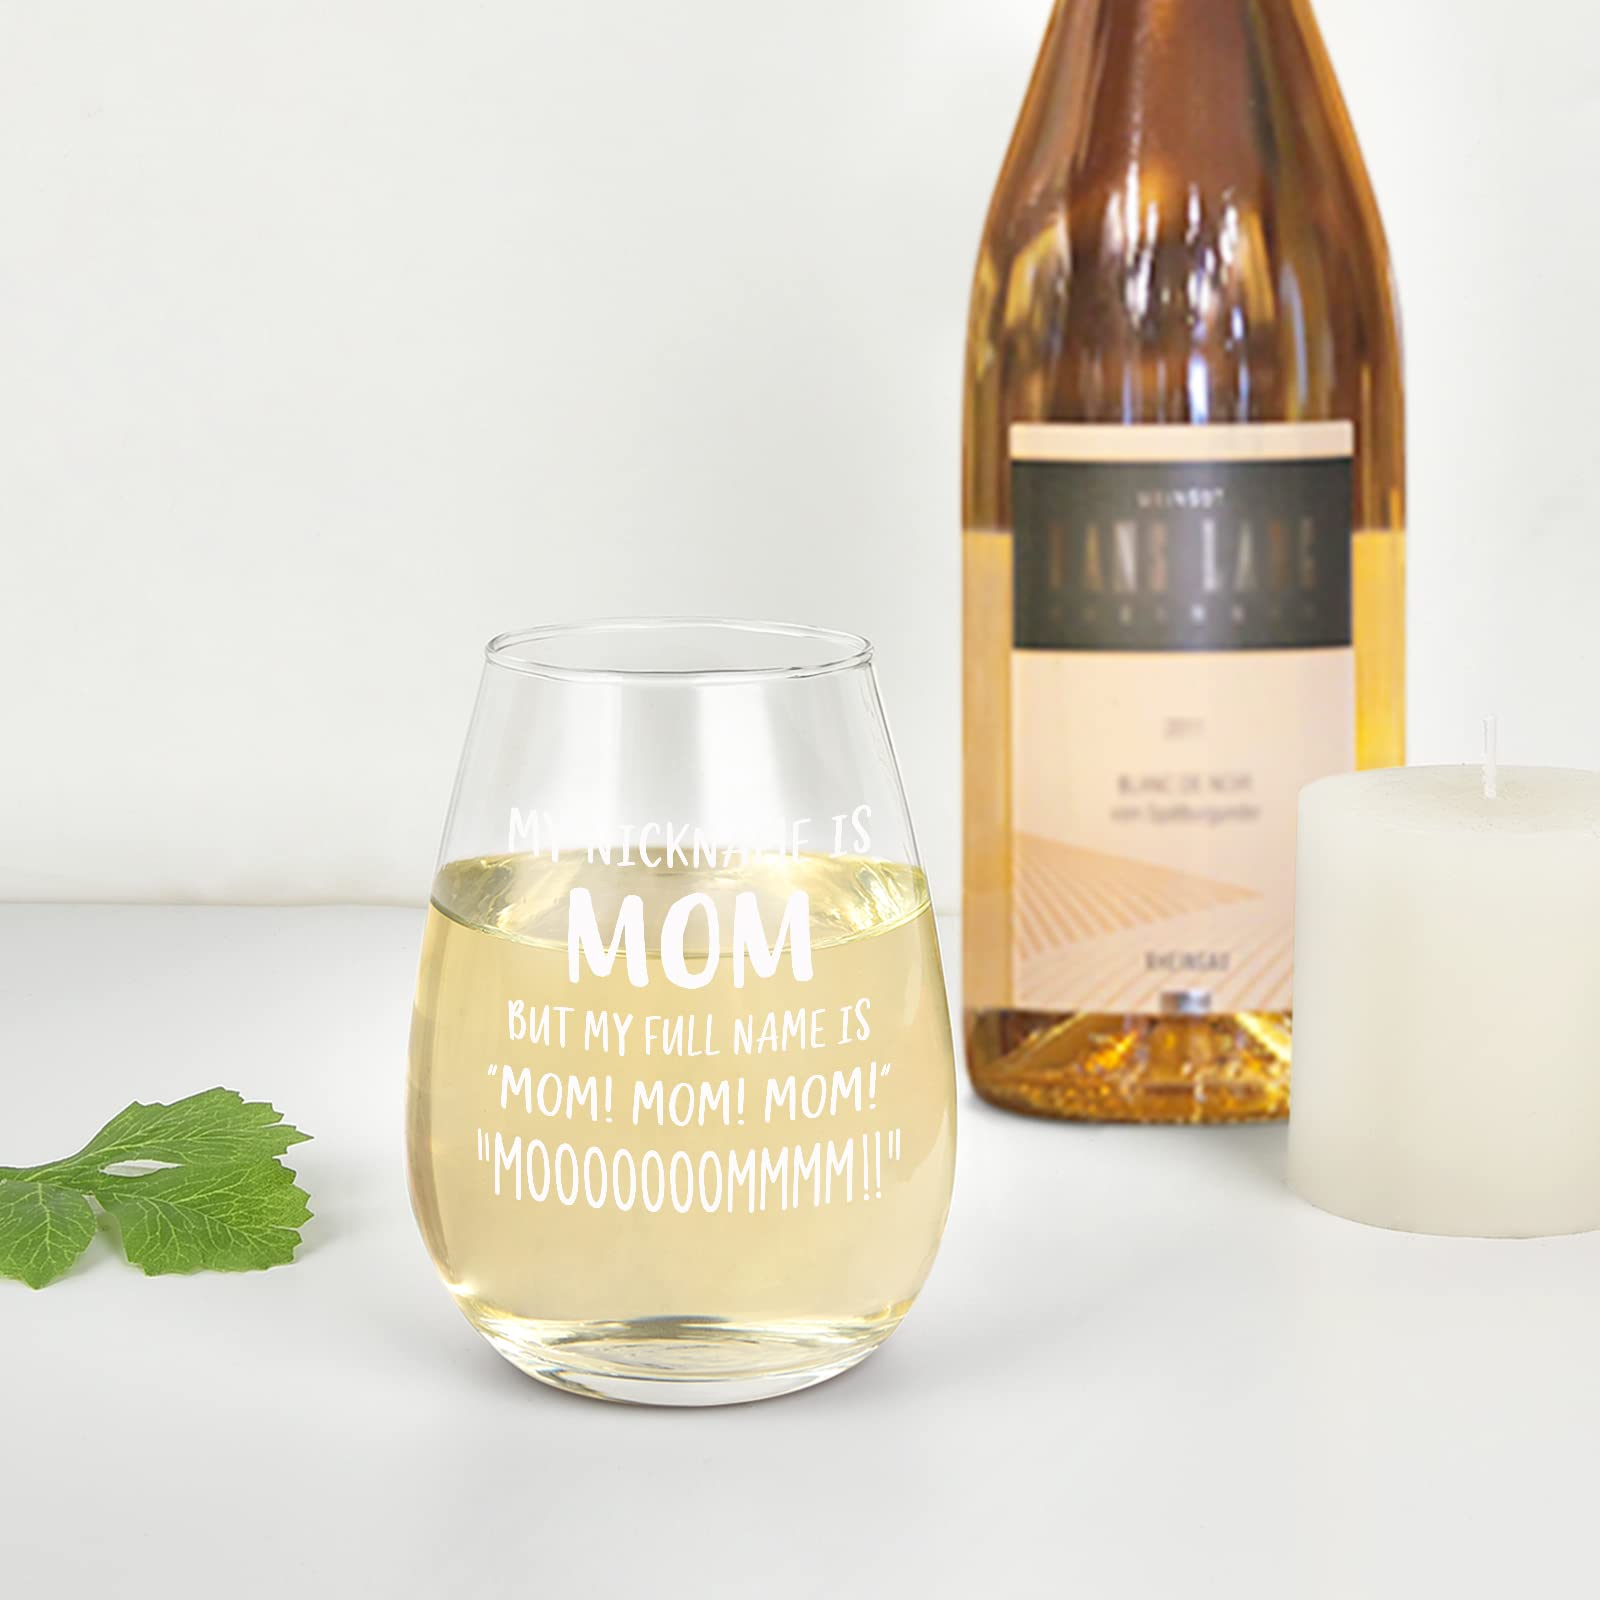 Modwnfy Funny Gift for Mom, Mother's Day Wine Glass, Best Mommy Stemless Wine Glass, Mothers Day Gifts for Mom New Mom Mother Mama Women Wife, Daughter Gifts from Mom On Baby Shower, 15 Oz